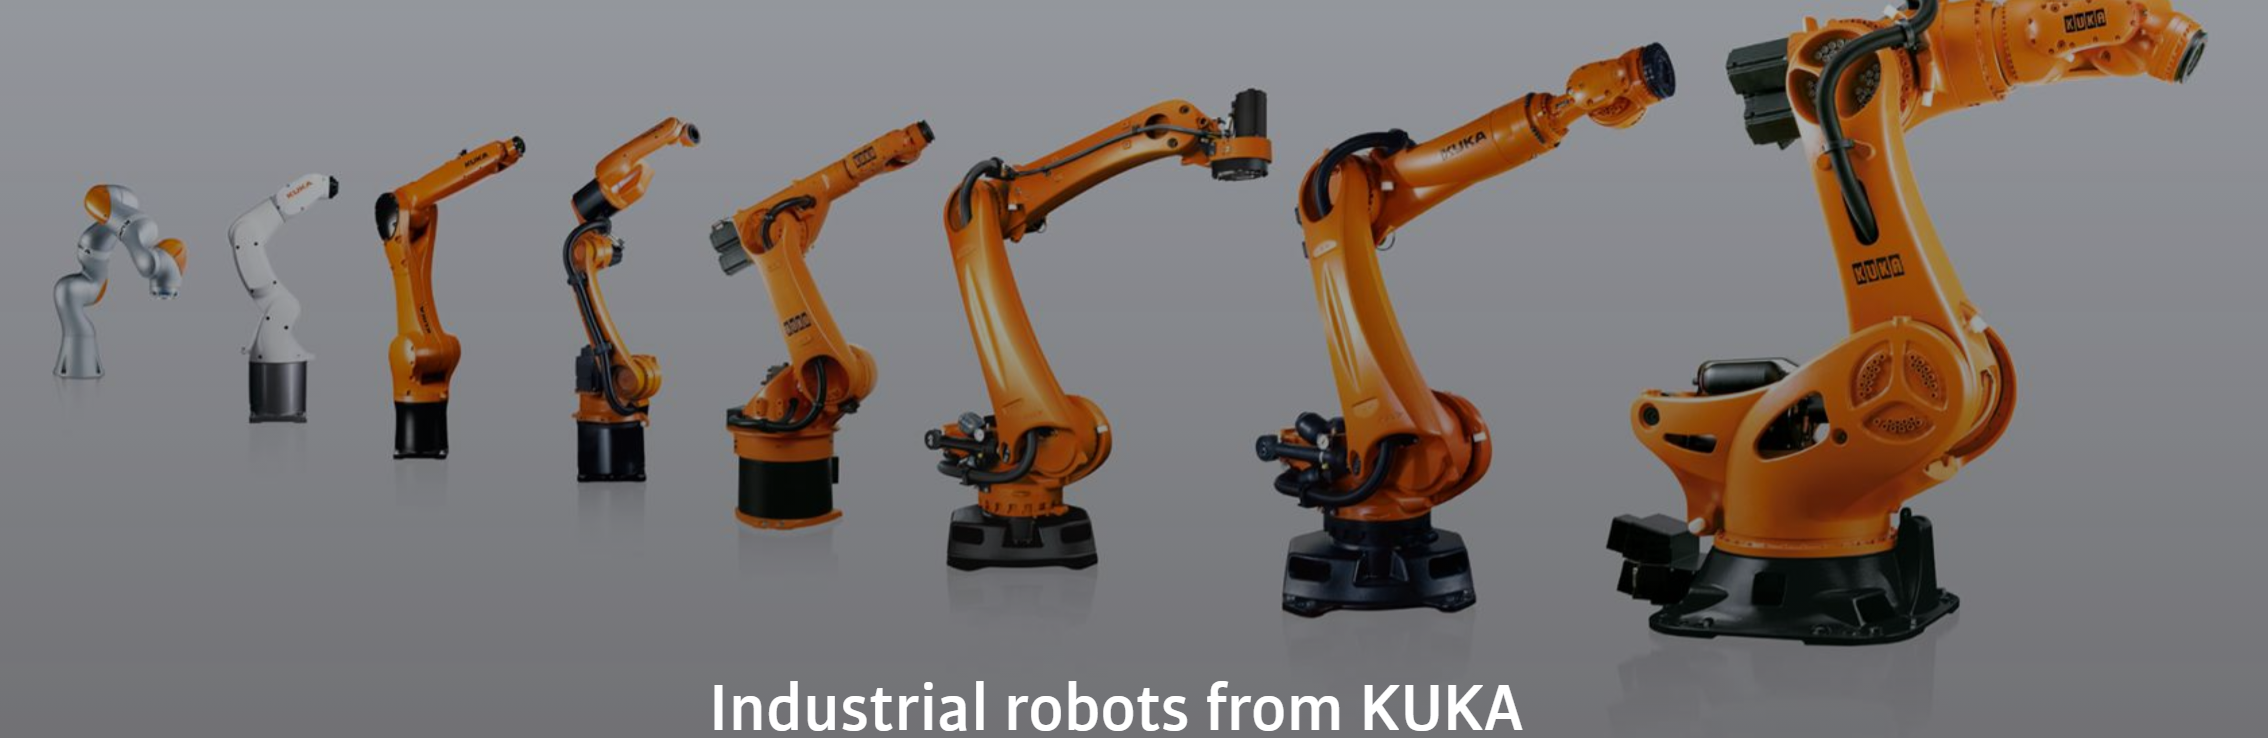 Thermo 05) Understanding Kuka Robot arm twist joint | by Ahmed Amin | Medium